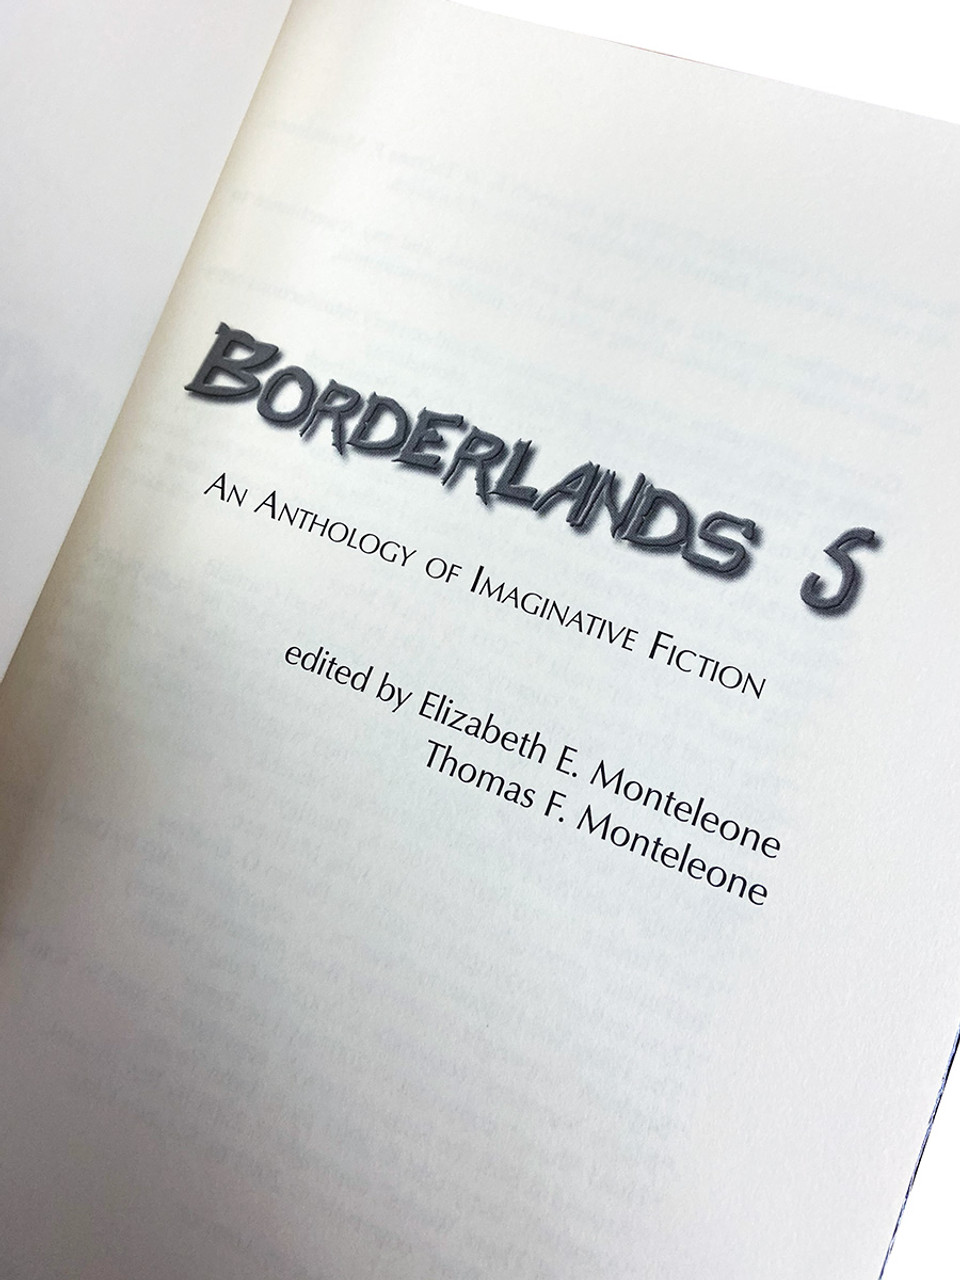 "Borderlands 5: An Anthology of Imaginative Fiction" Signed Limited First Edition, Slipcased No. 429 of 500 [Very Fine]